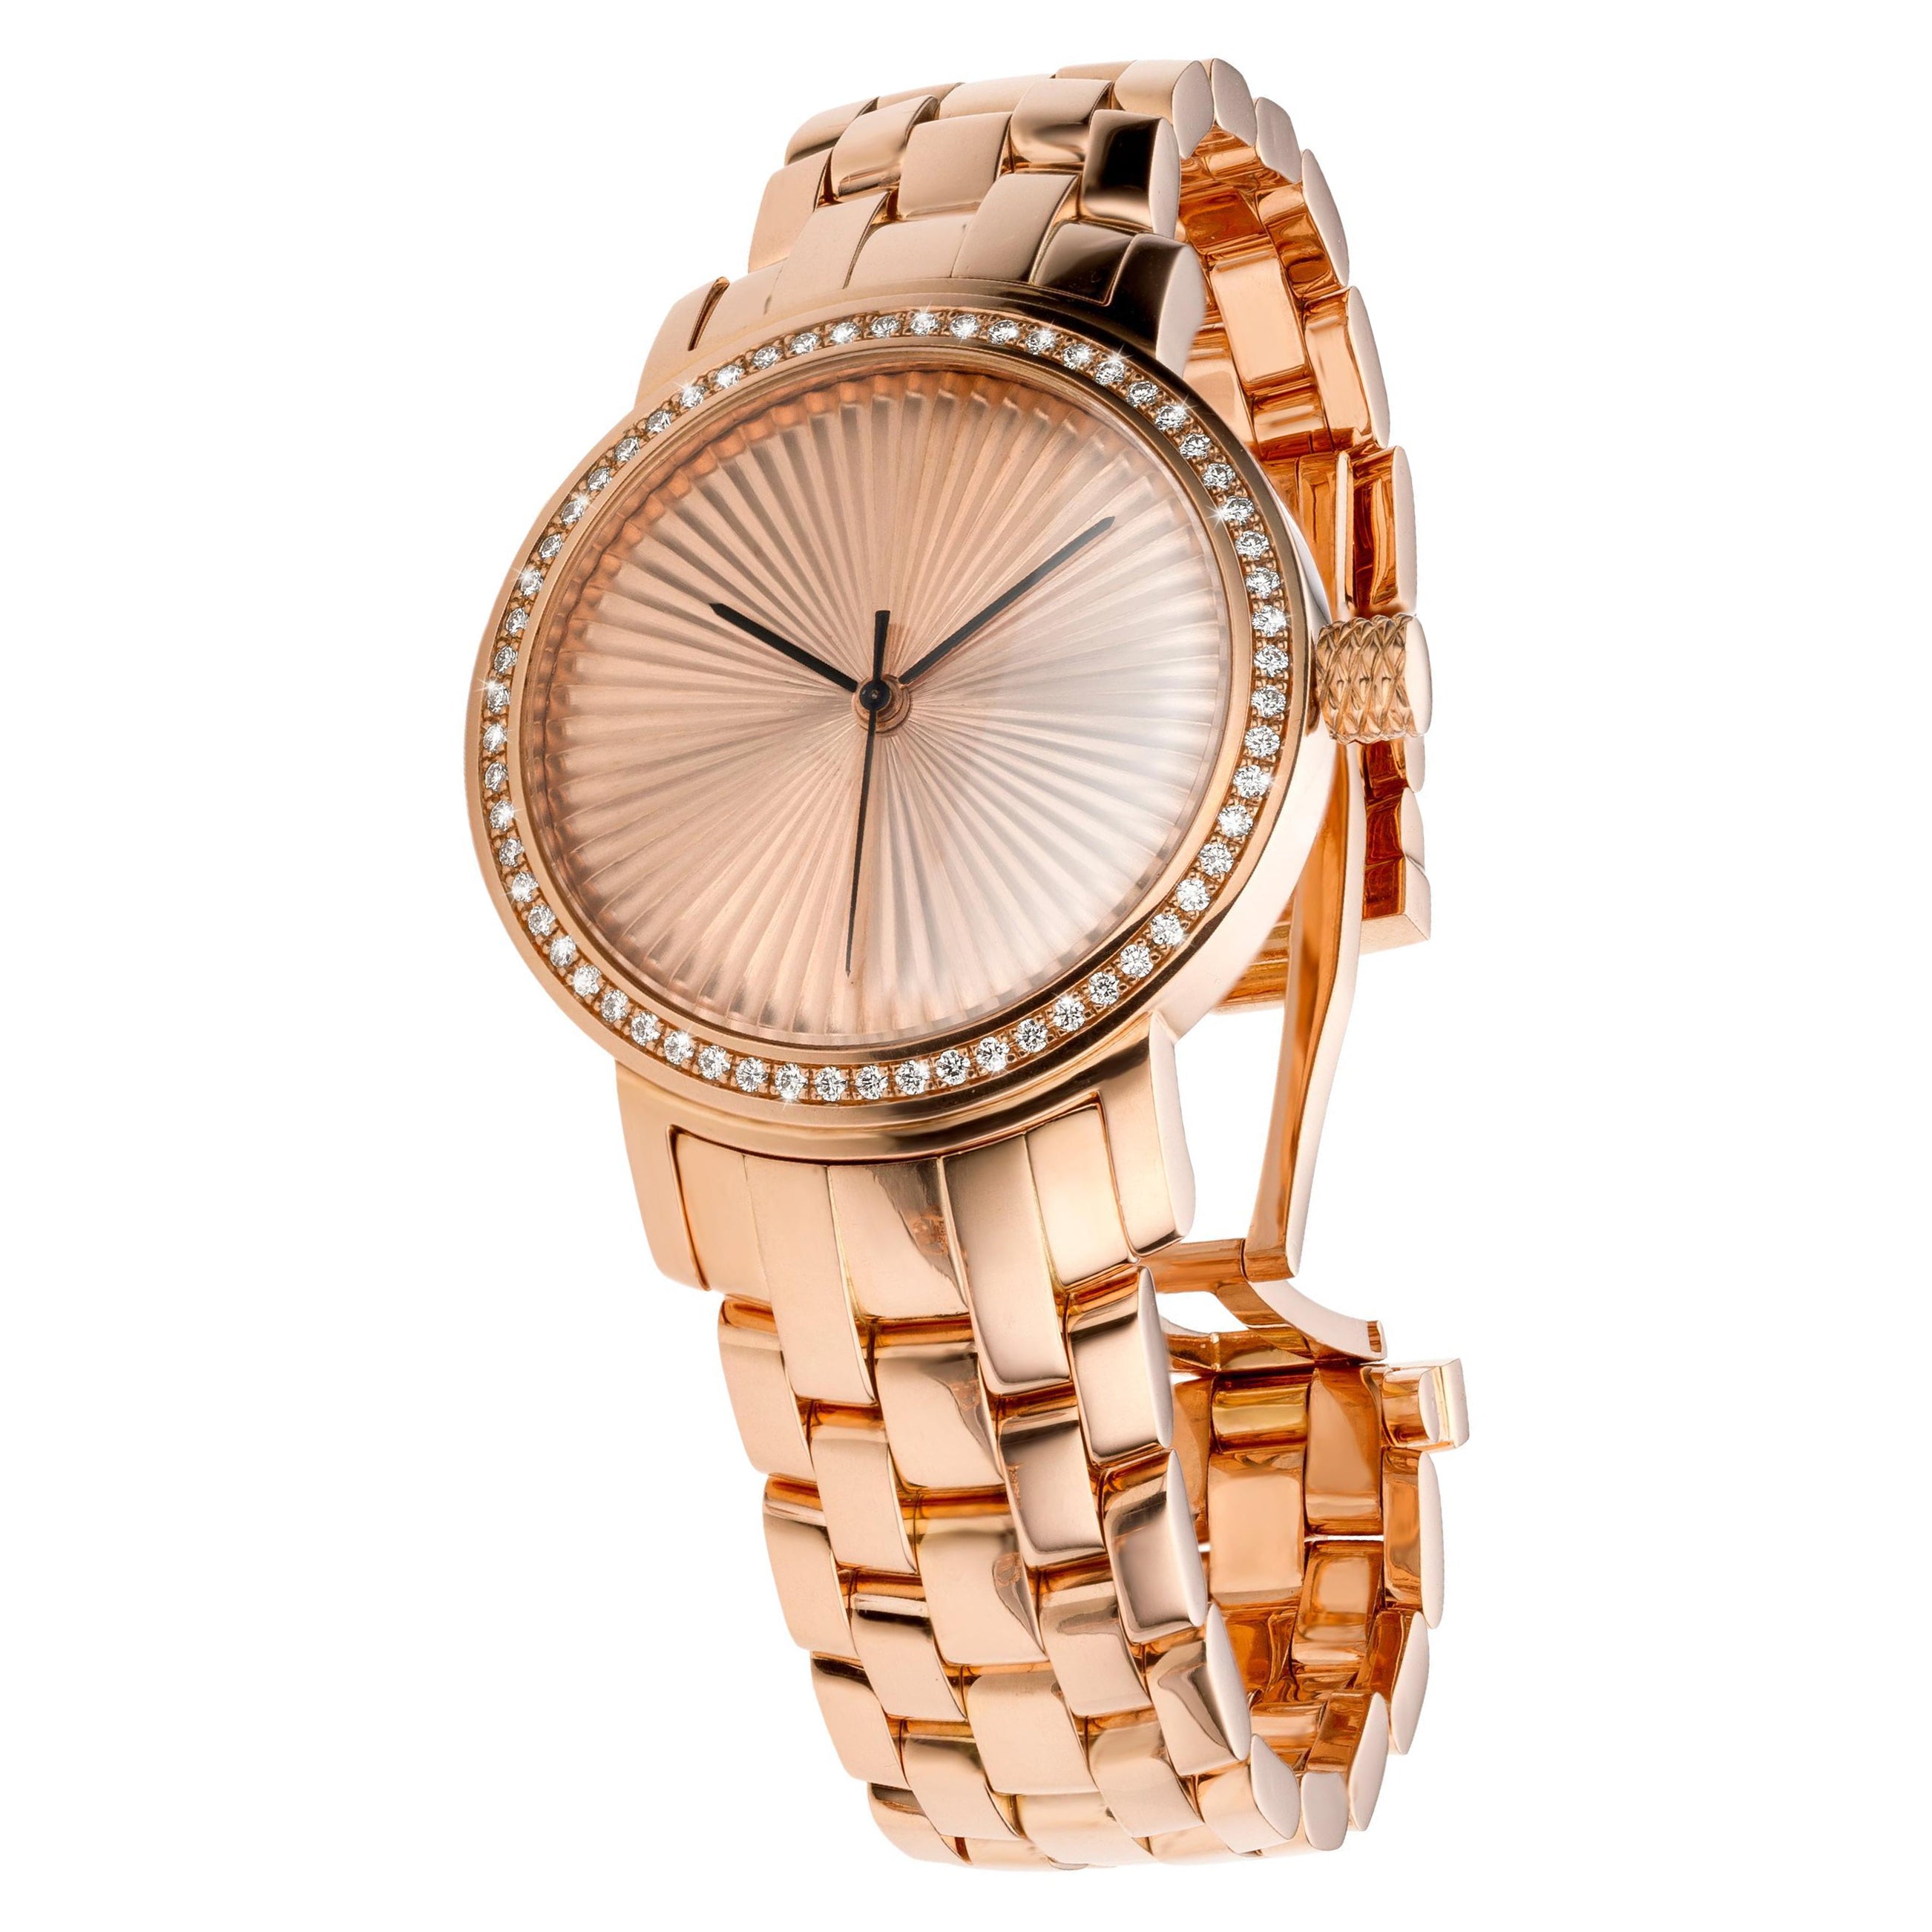 Cober “Nº2” Ladies Rosé Gold with 60 Diamonds Wristwatch in stock and handmade For Sale